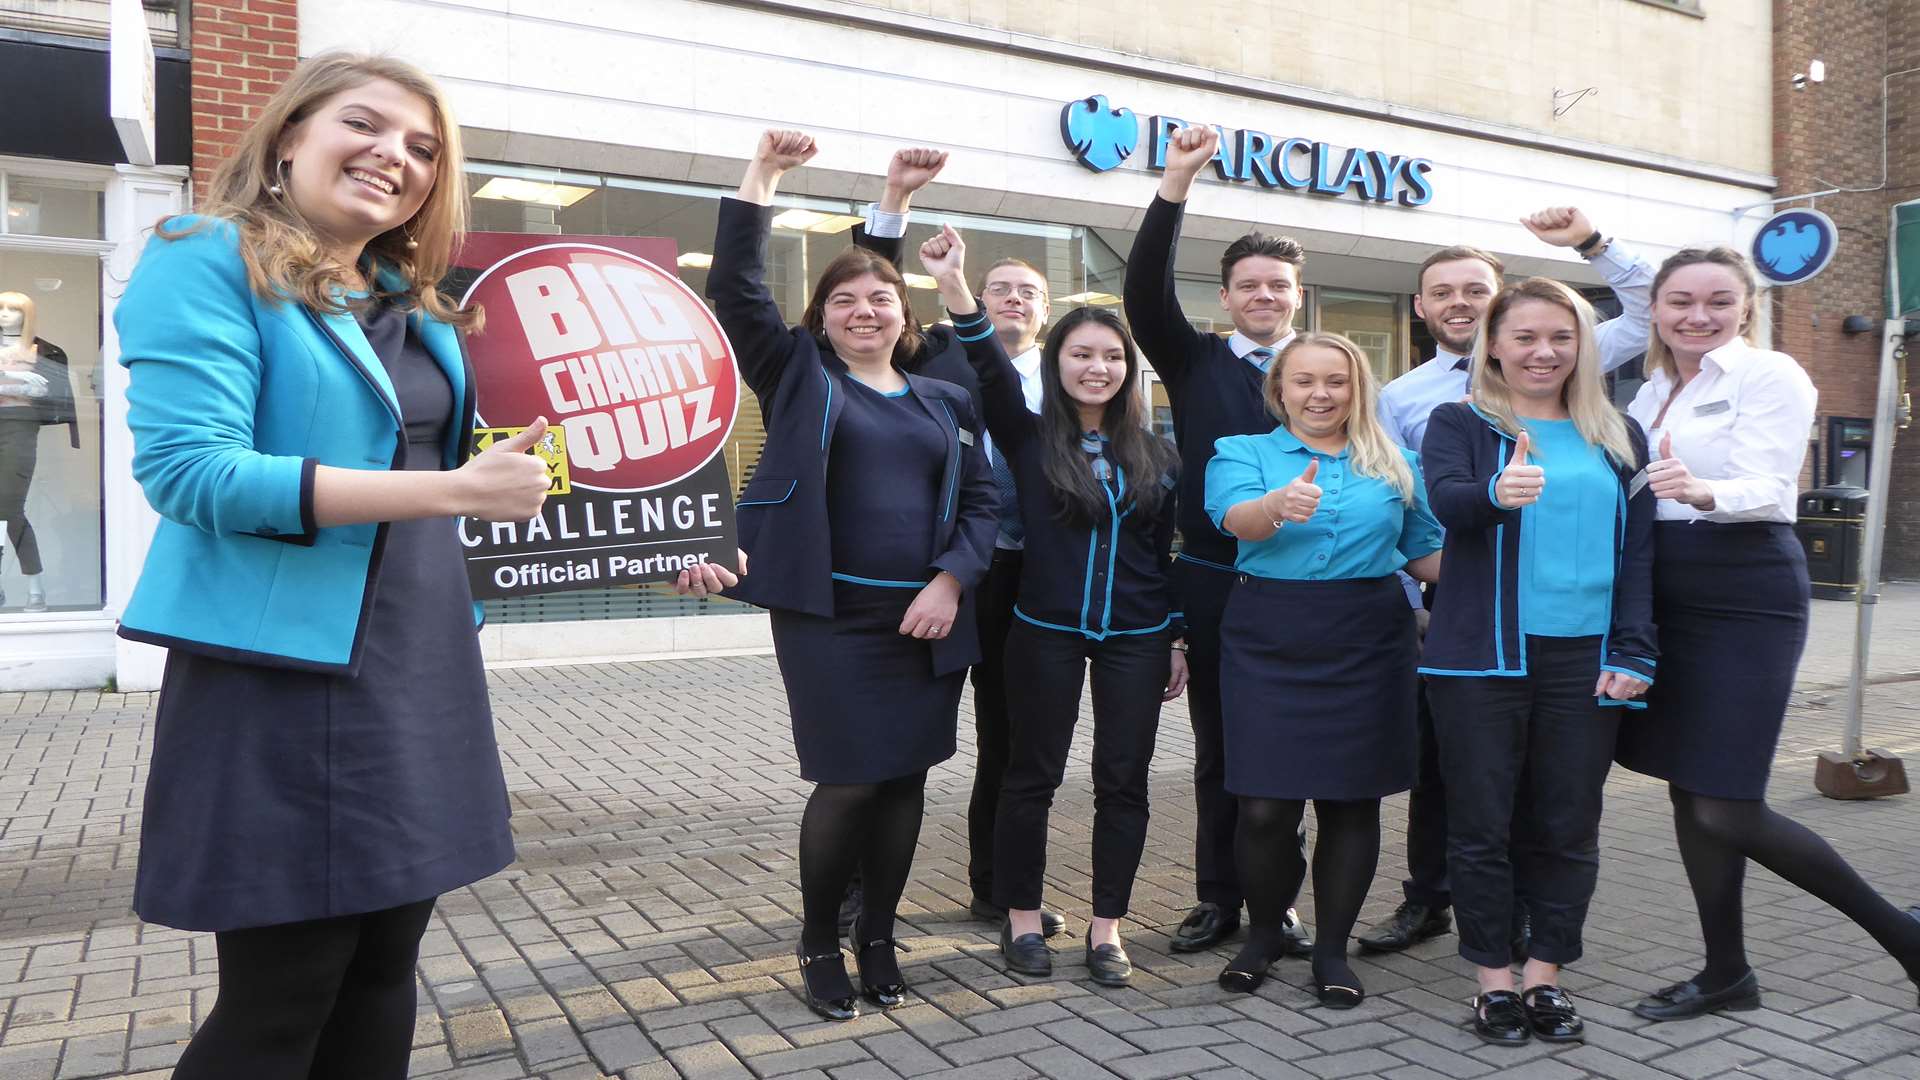 Rebecca Hadley and staff from Barclays announce their support of the Canterbury KM Big Charity Quiz